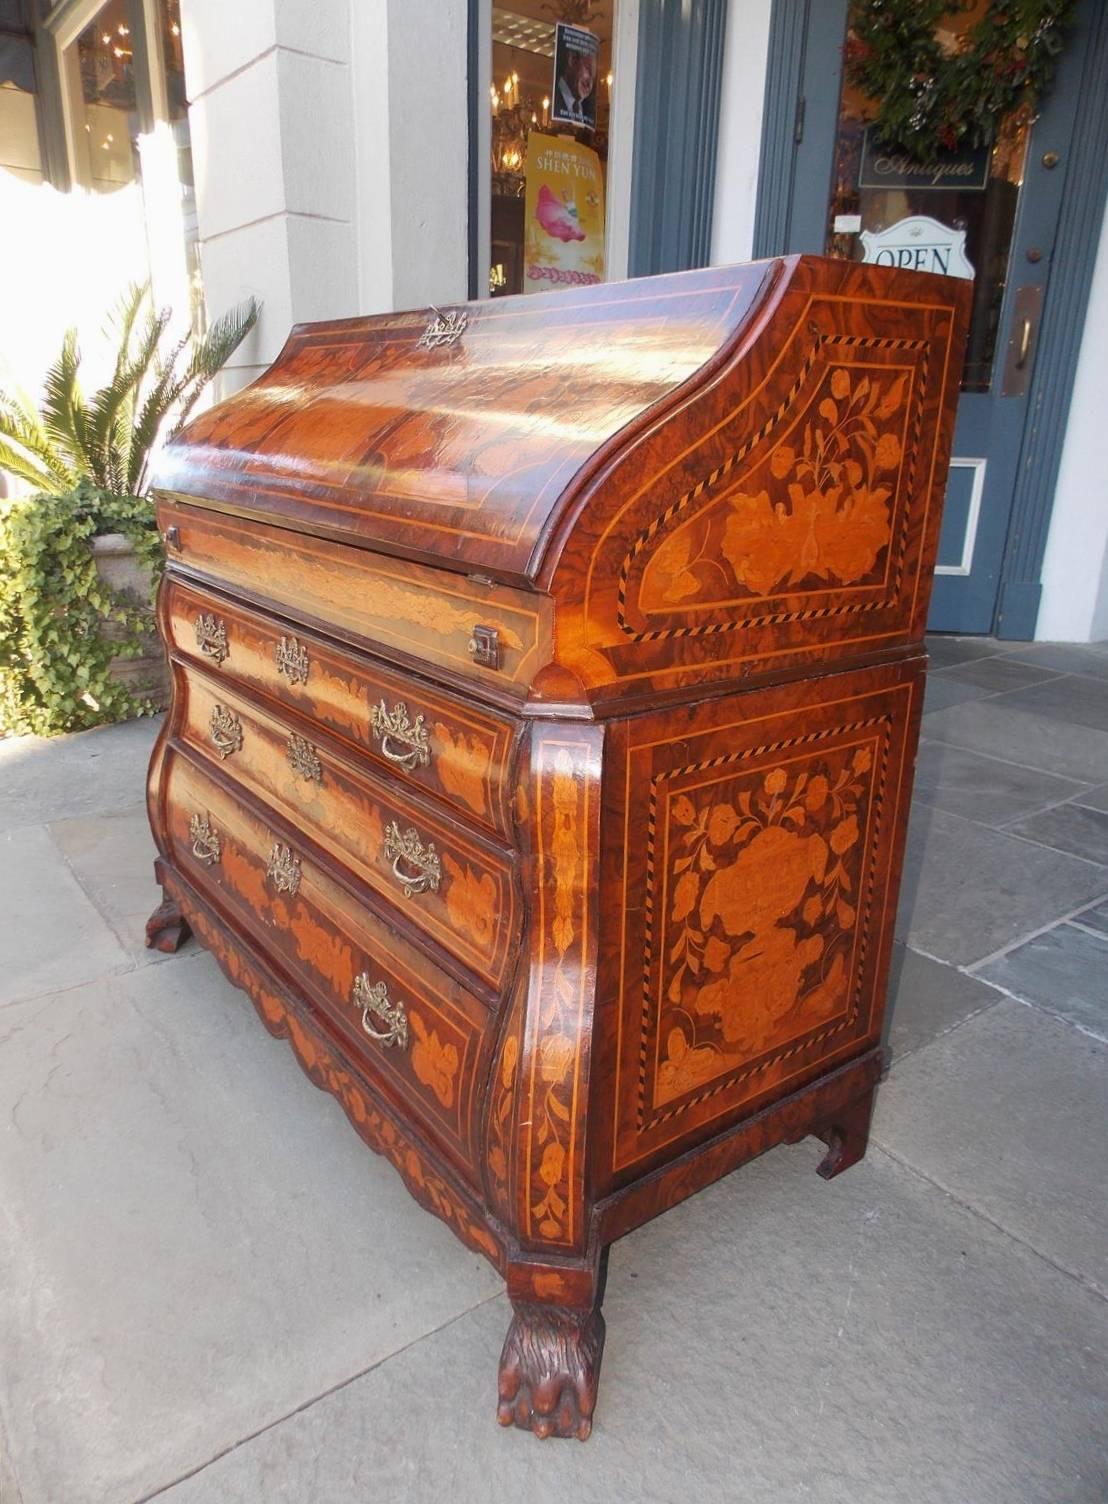 Dutch Marquetry Burl Walnut Bombay Figural and Foliage Inlaid Desk, Circa 1850 In Excellent Condition For Sale In Hollywood, SC